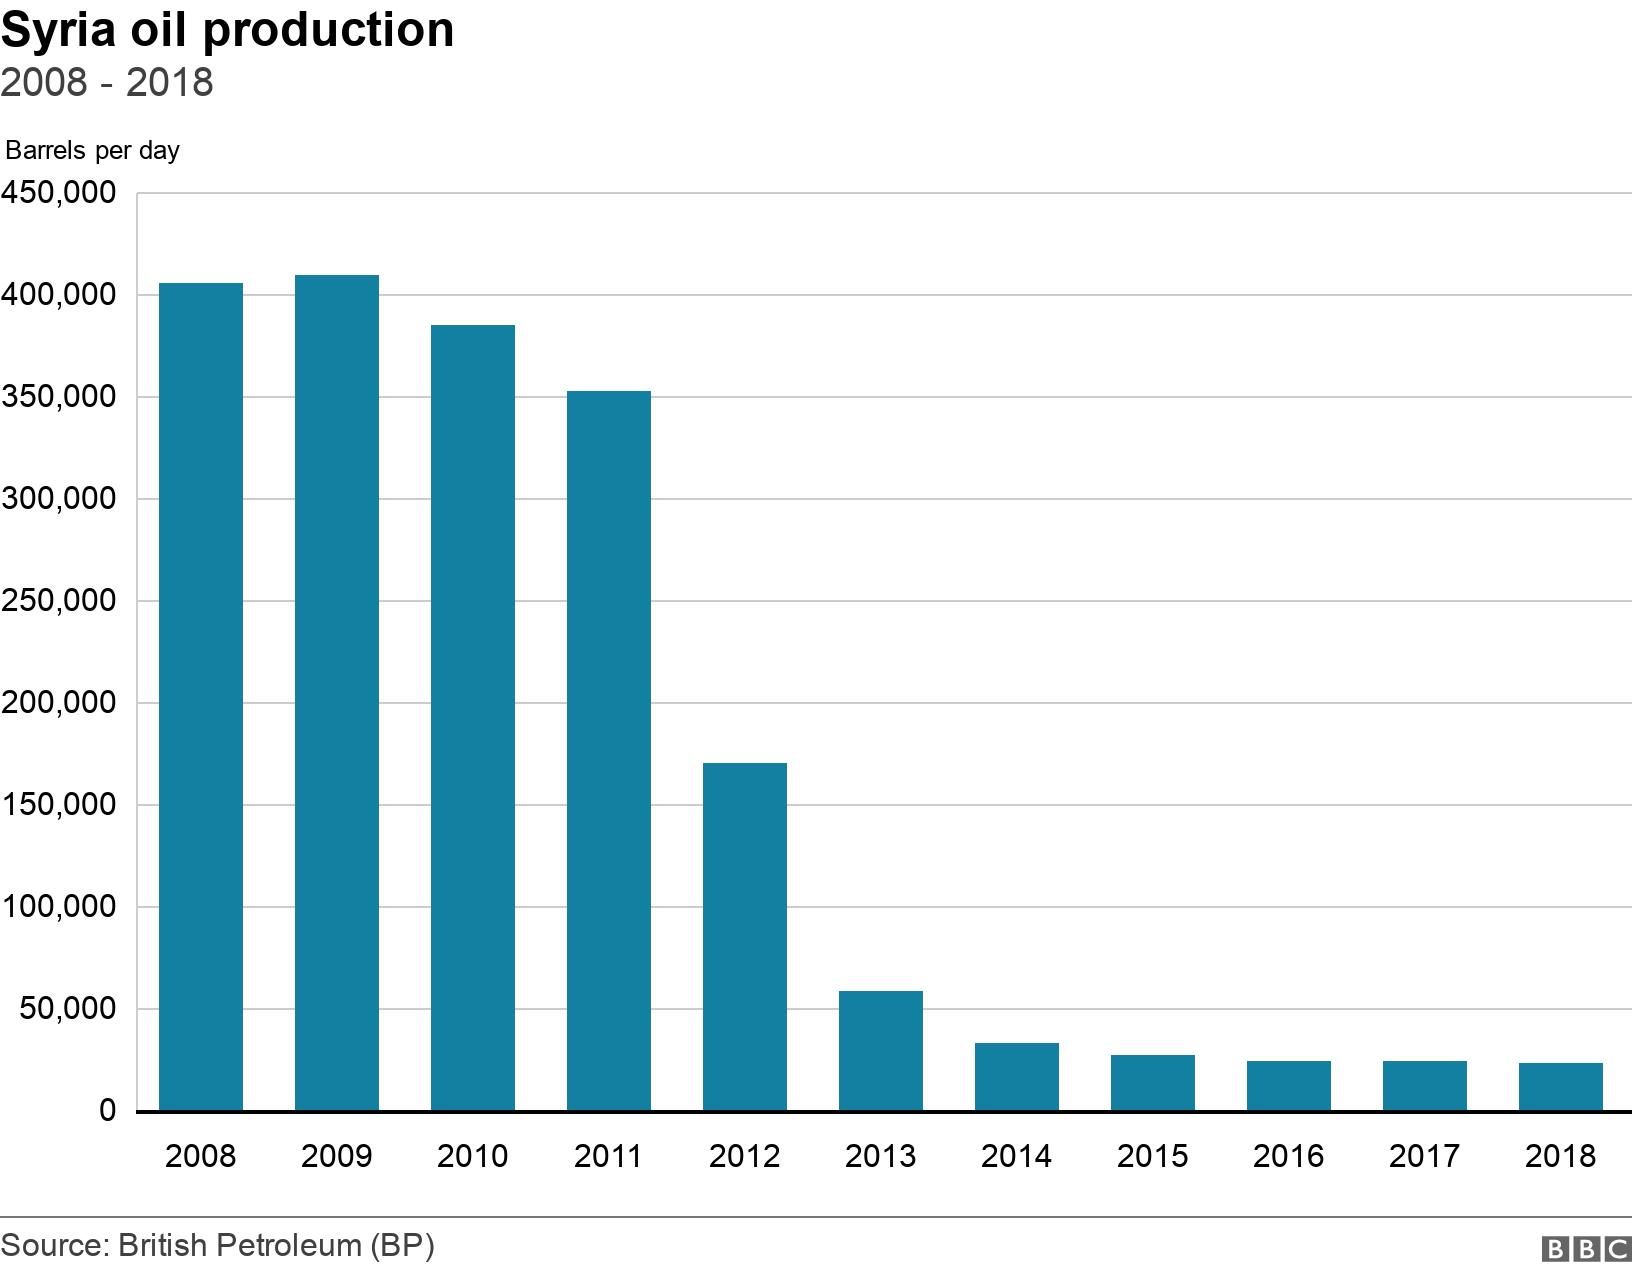 Syria oil production . 2008 - 2018. Data showing Syrian oil production from 2008 to 2018 .